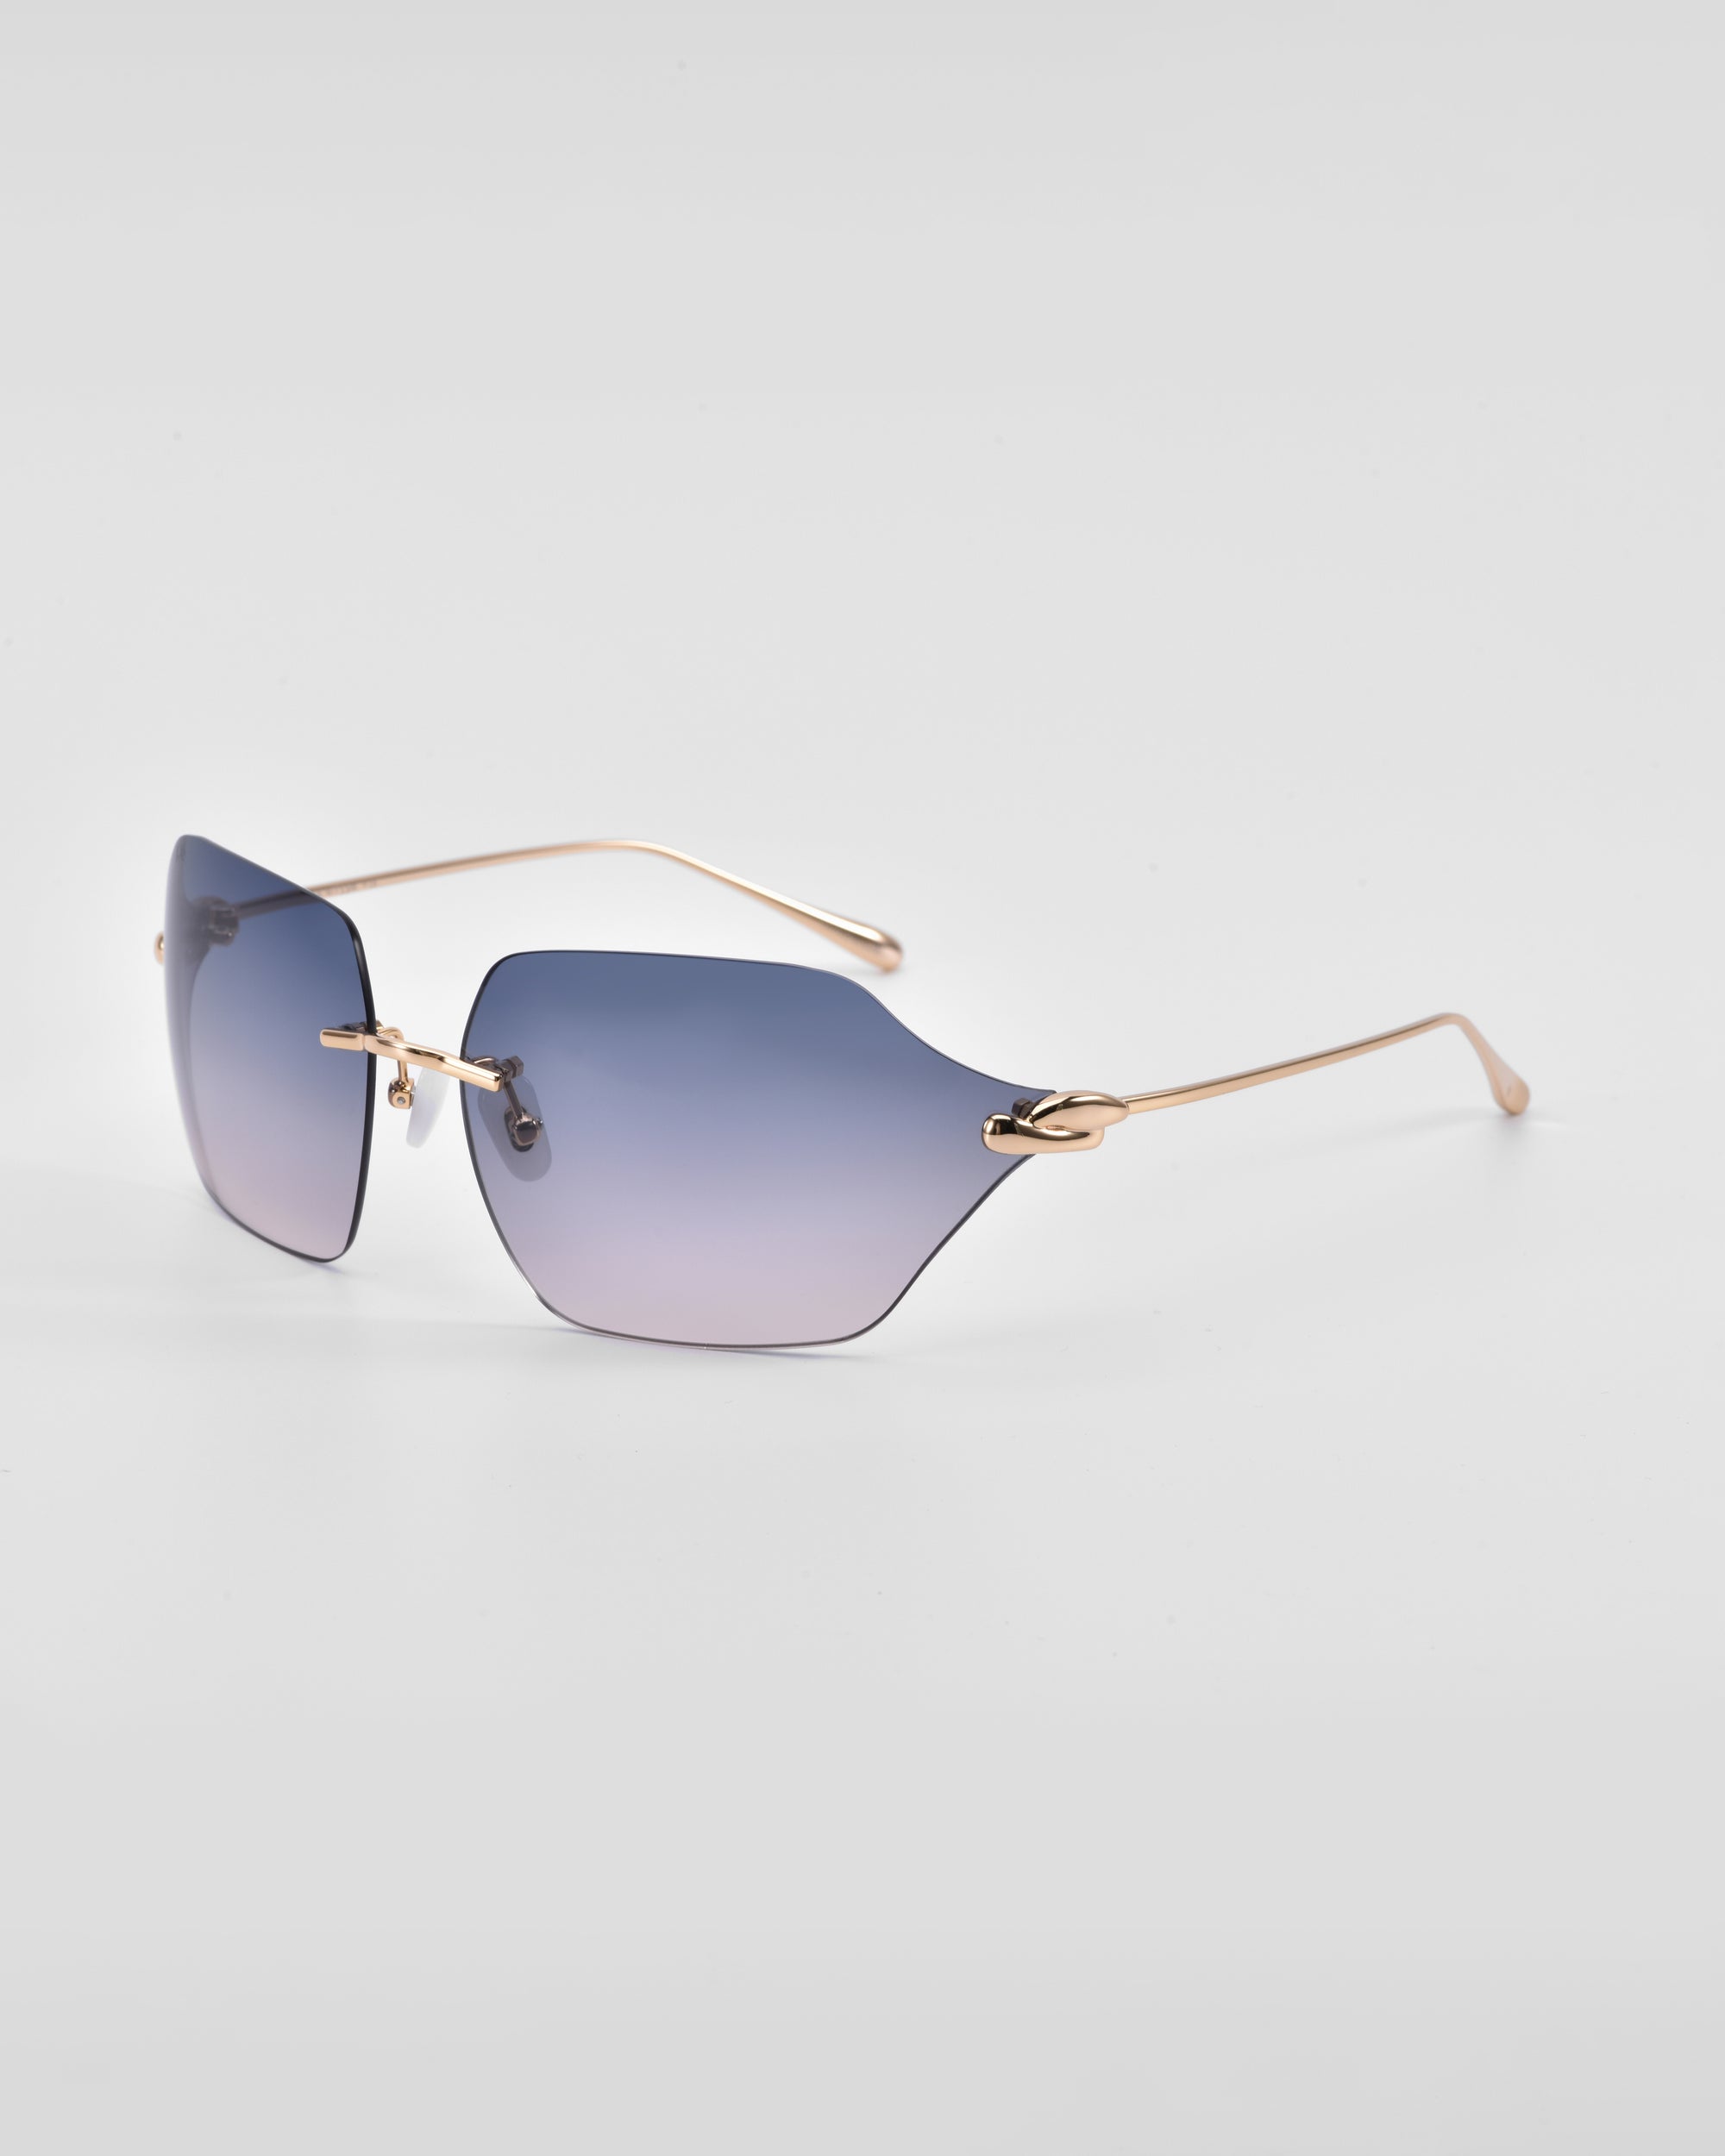 A pair of stylish For Art&#39;s Sake® Serpent II sunglasses featuring 18-karat gold plating on thin metal arms and a frameless wrap lens design with gradient lenses transitioning from a dark shade to a lighter blue at the bottom, set against a plain white background.